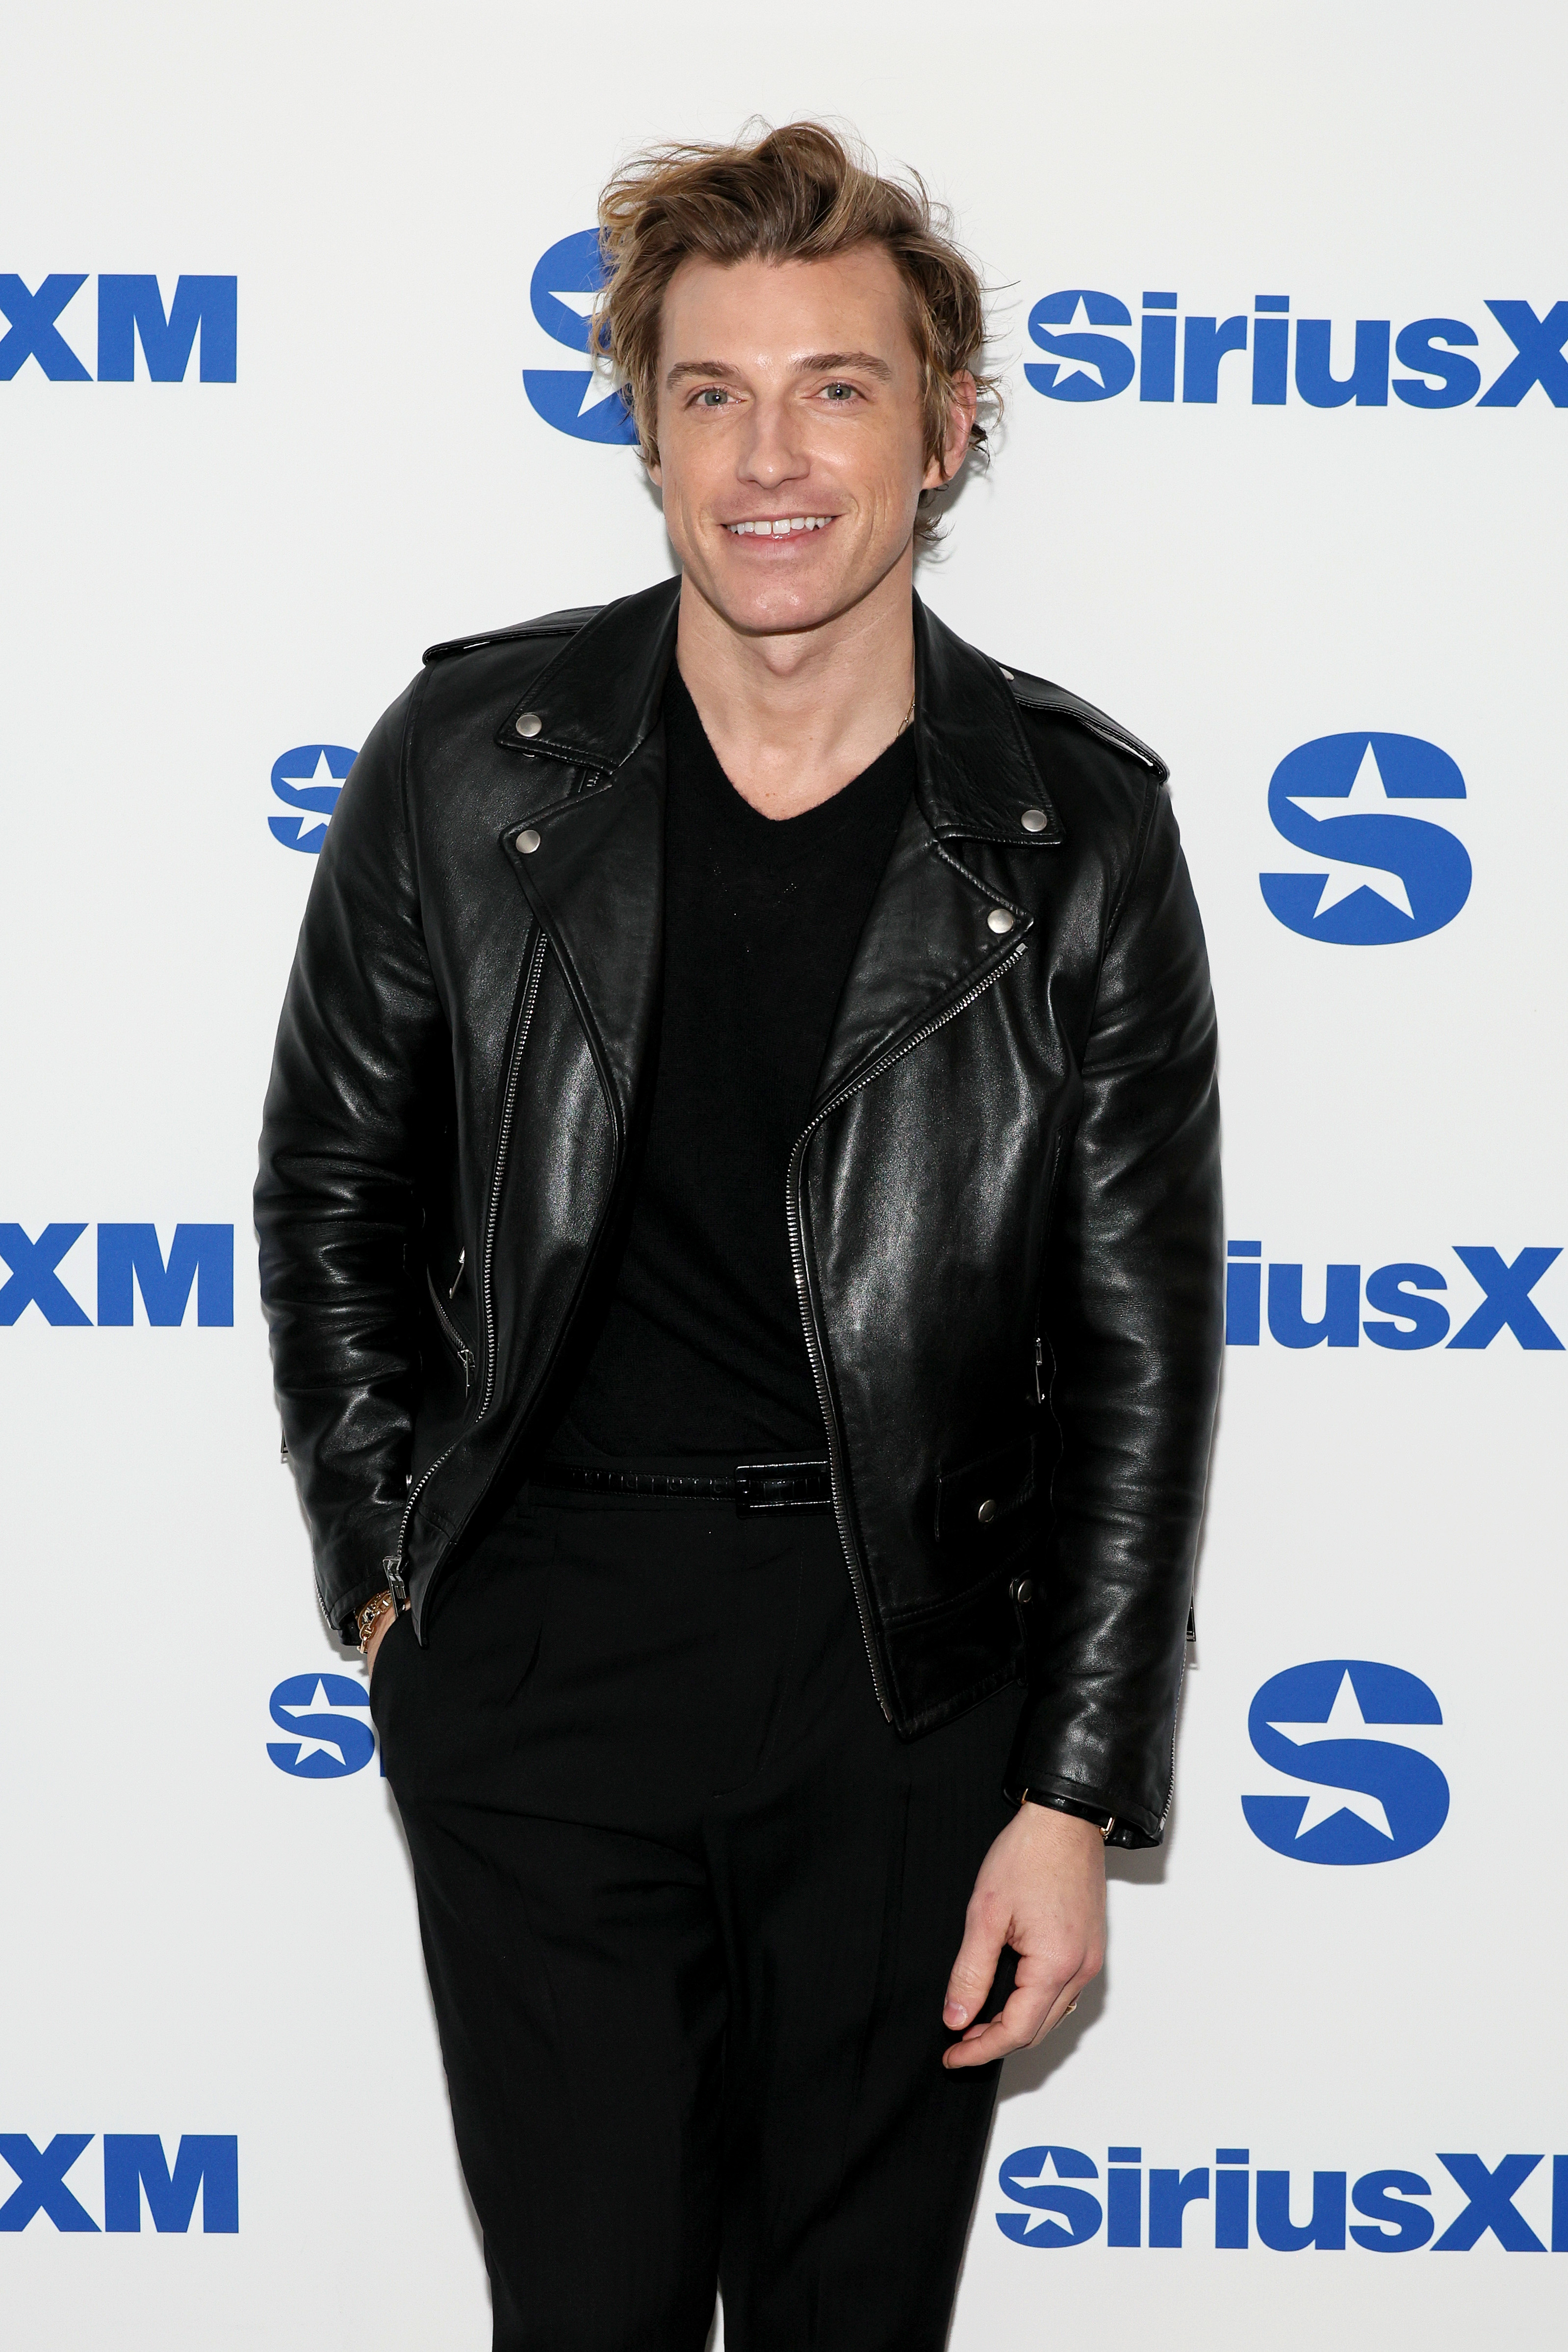 Jeremiah in a leather jacket and attire smiles standing before a SiriusXM backdrop